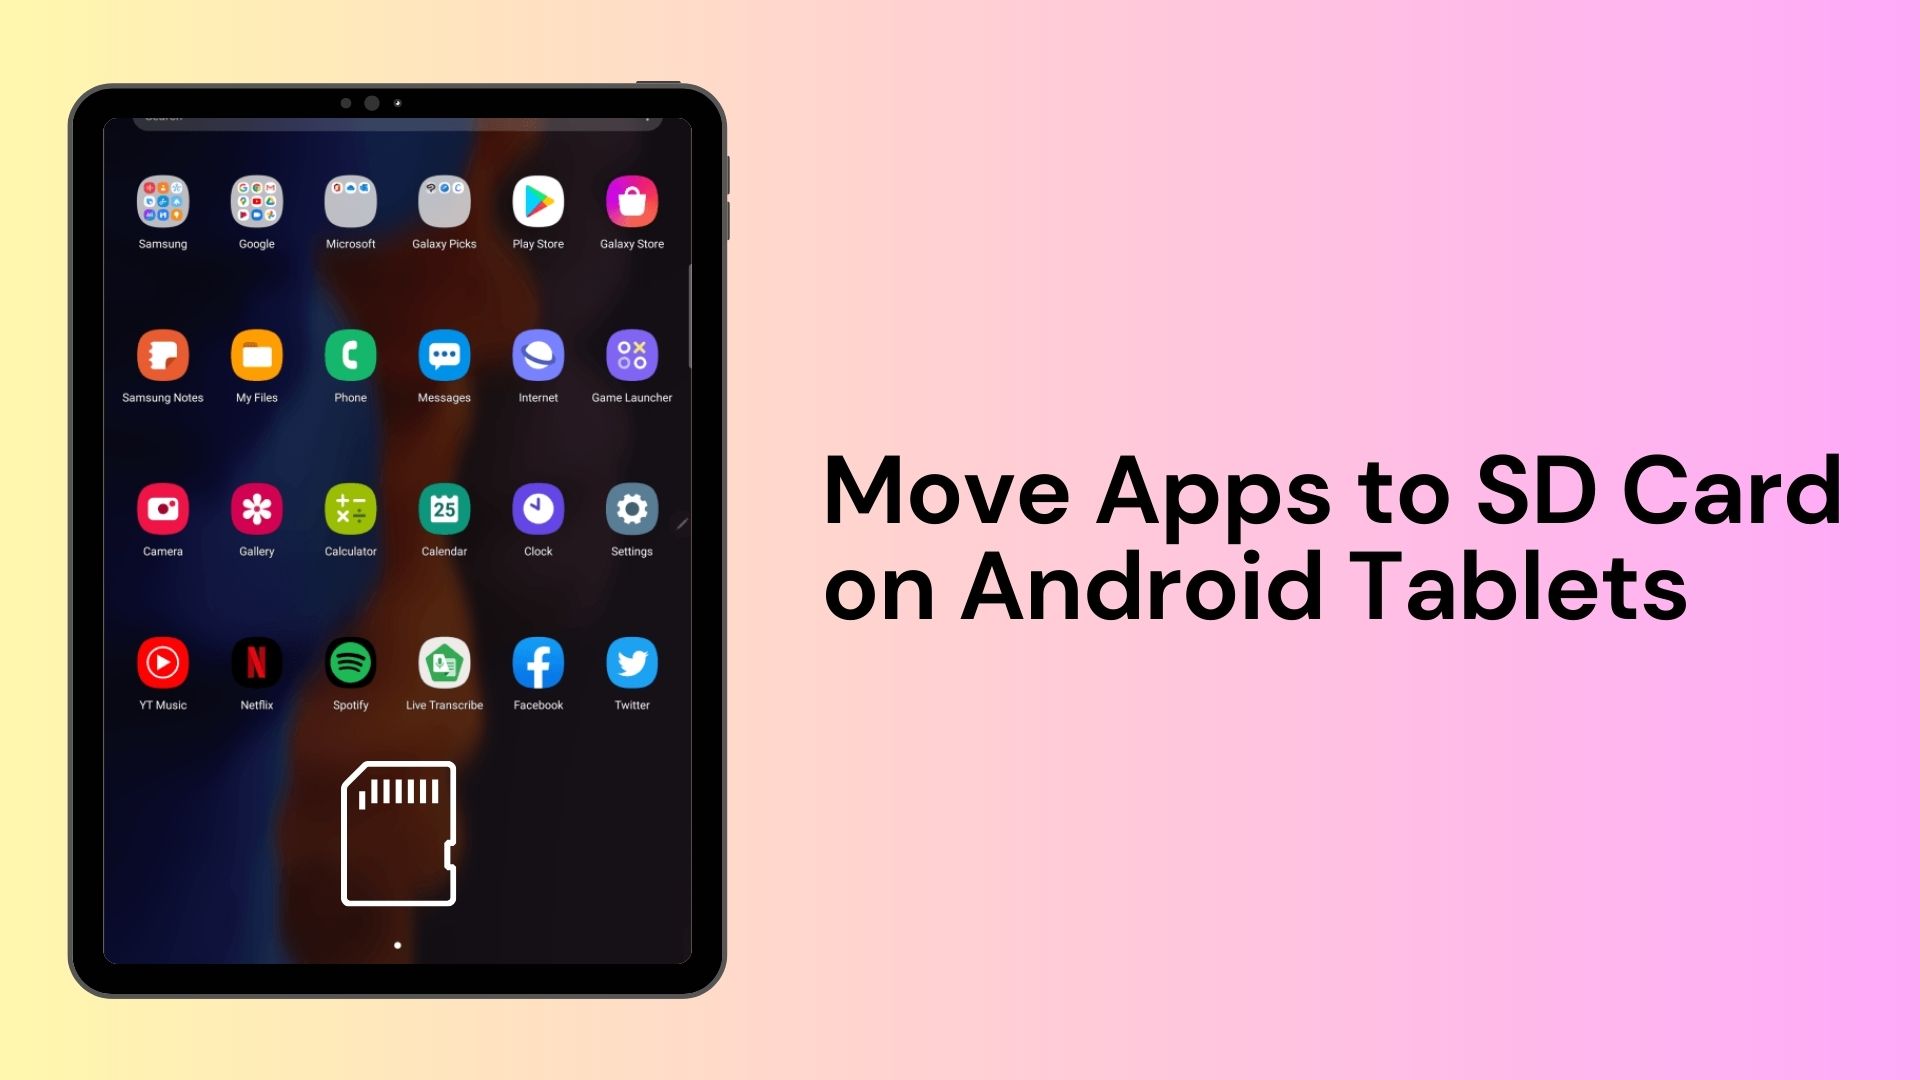 Move Apps to SD Card on Android Tablets